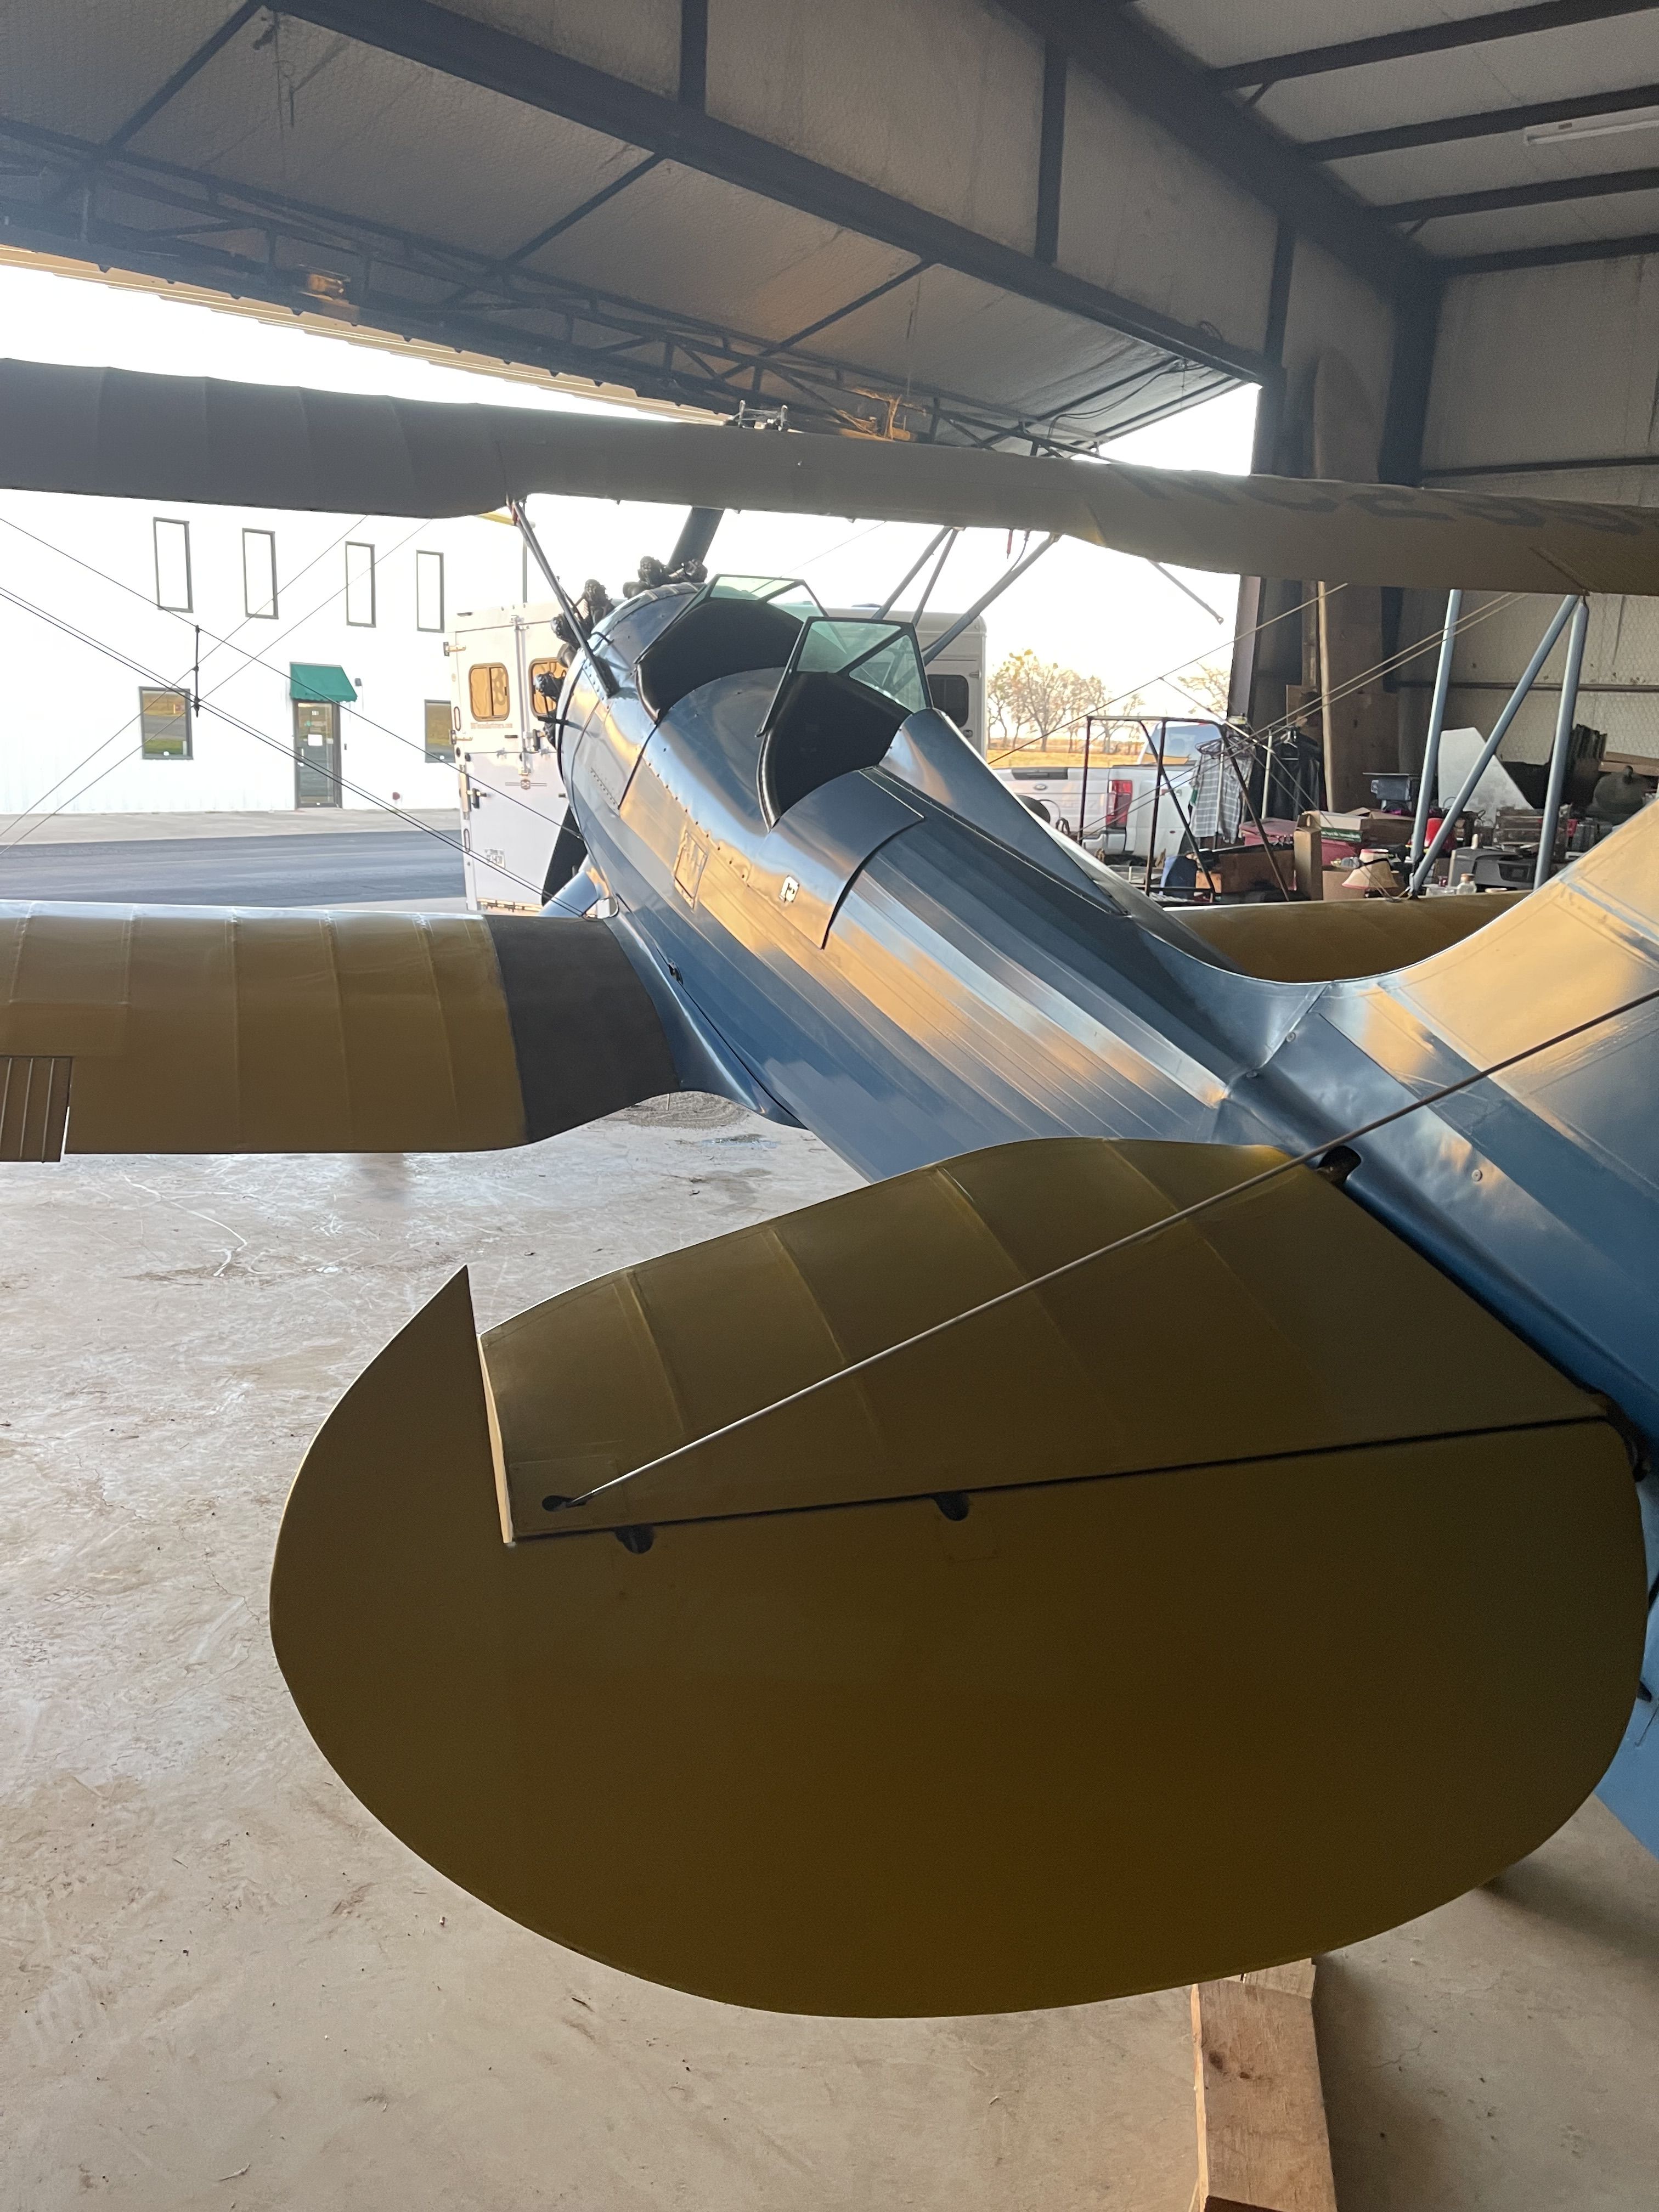 a blue and white rose parrakeet biplane sits at an the airport tiedown.